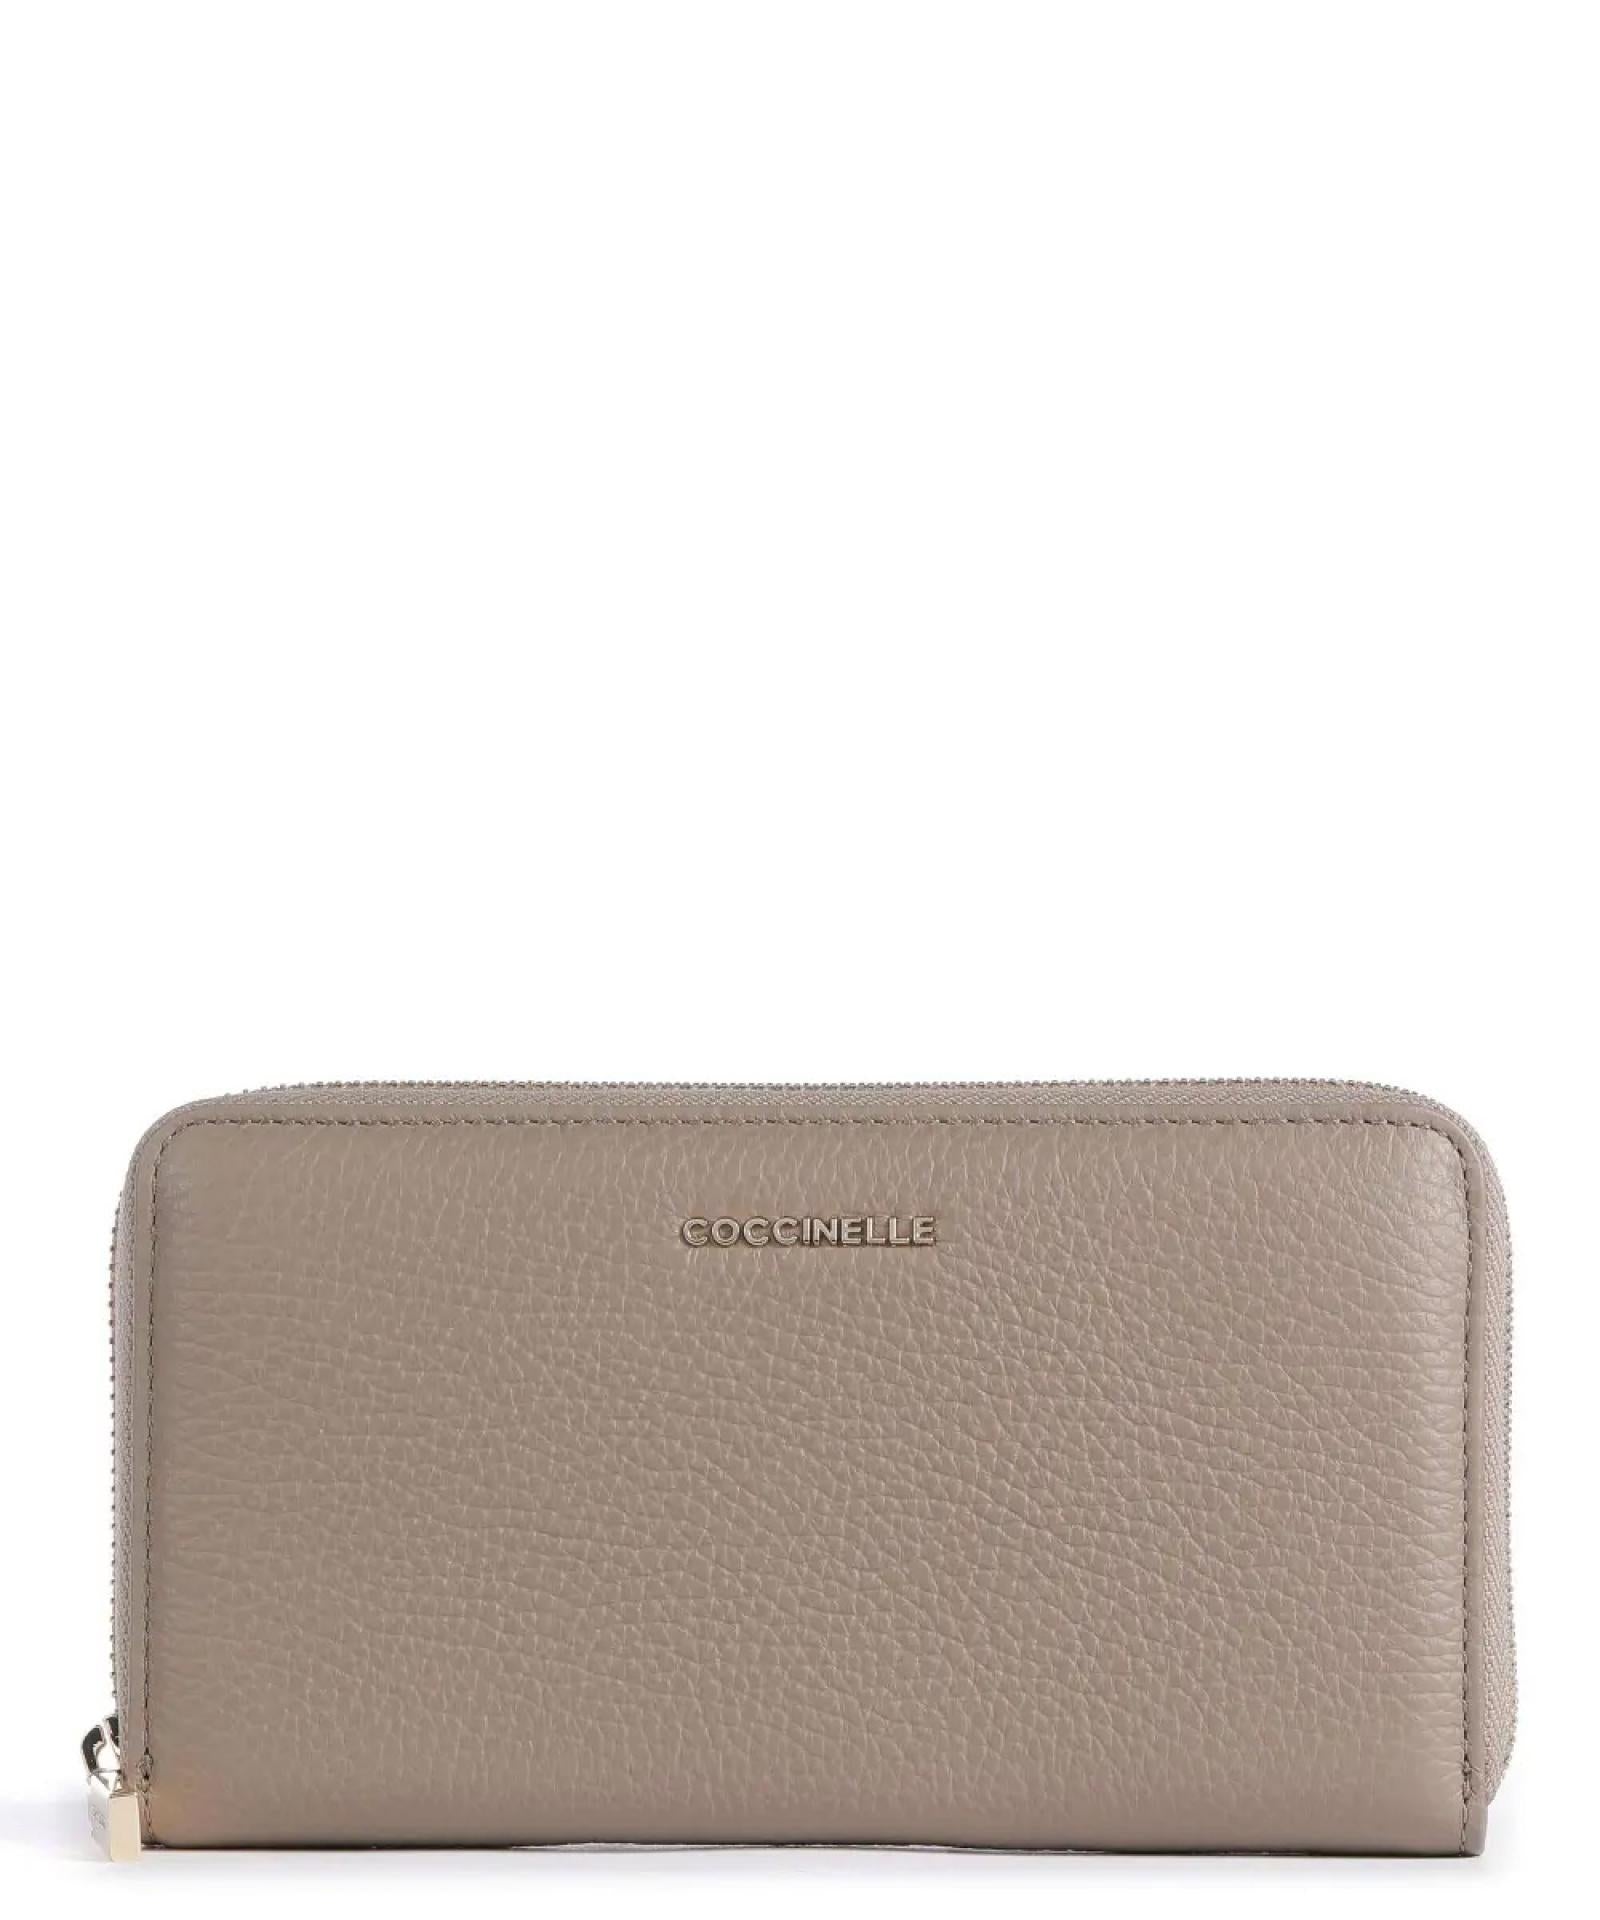 Coccinelle WALLET GRAINED LEATHER / WARM TAUPE